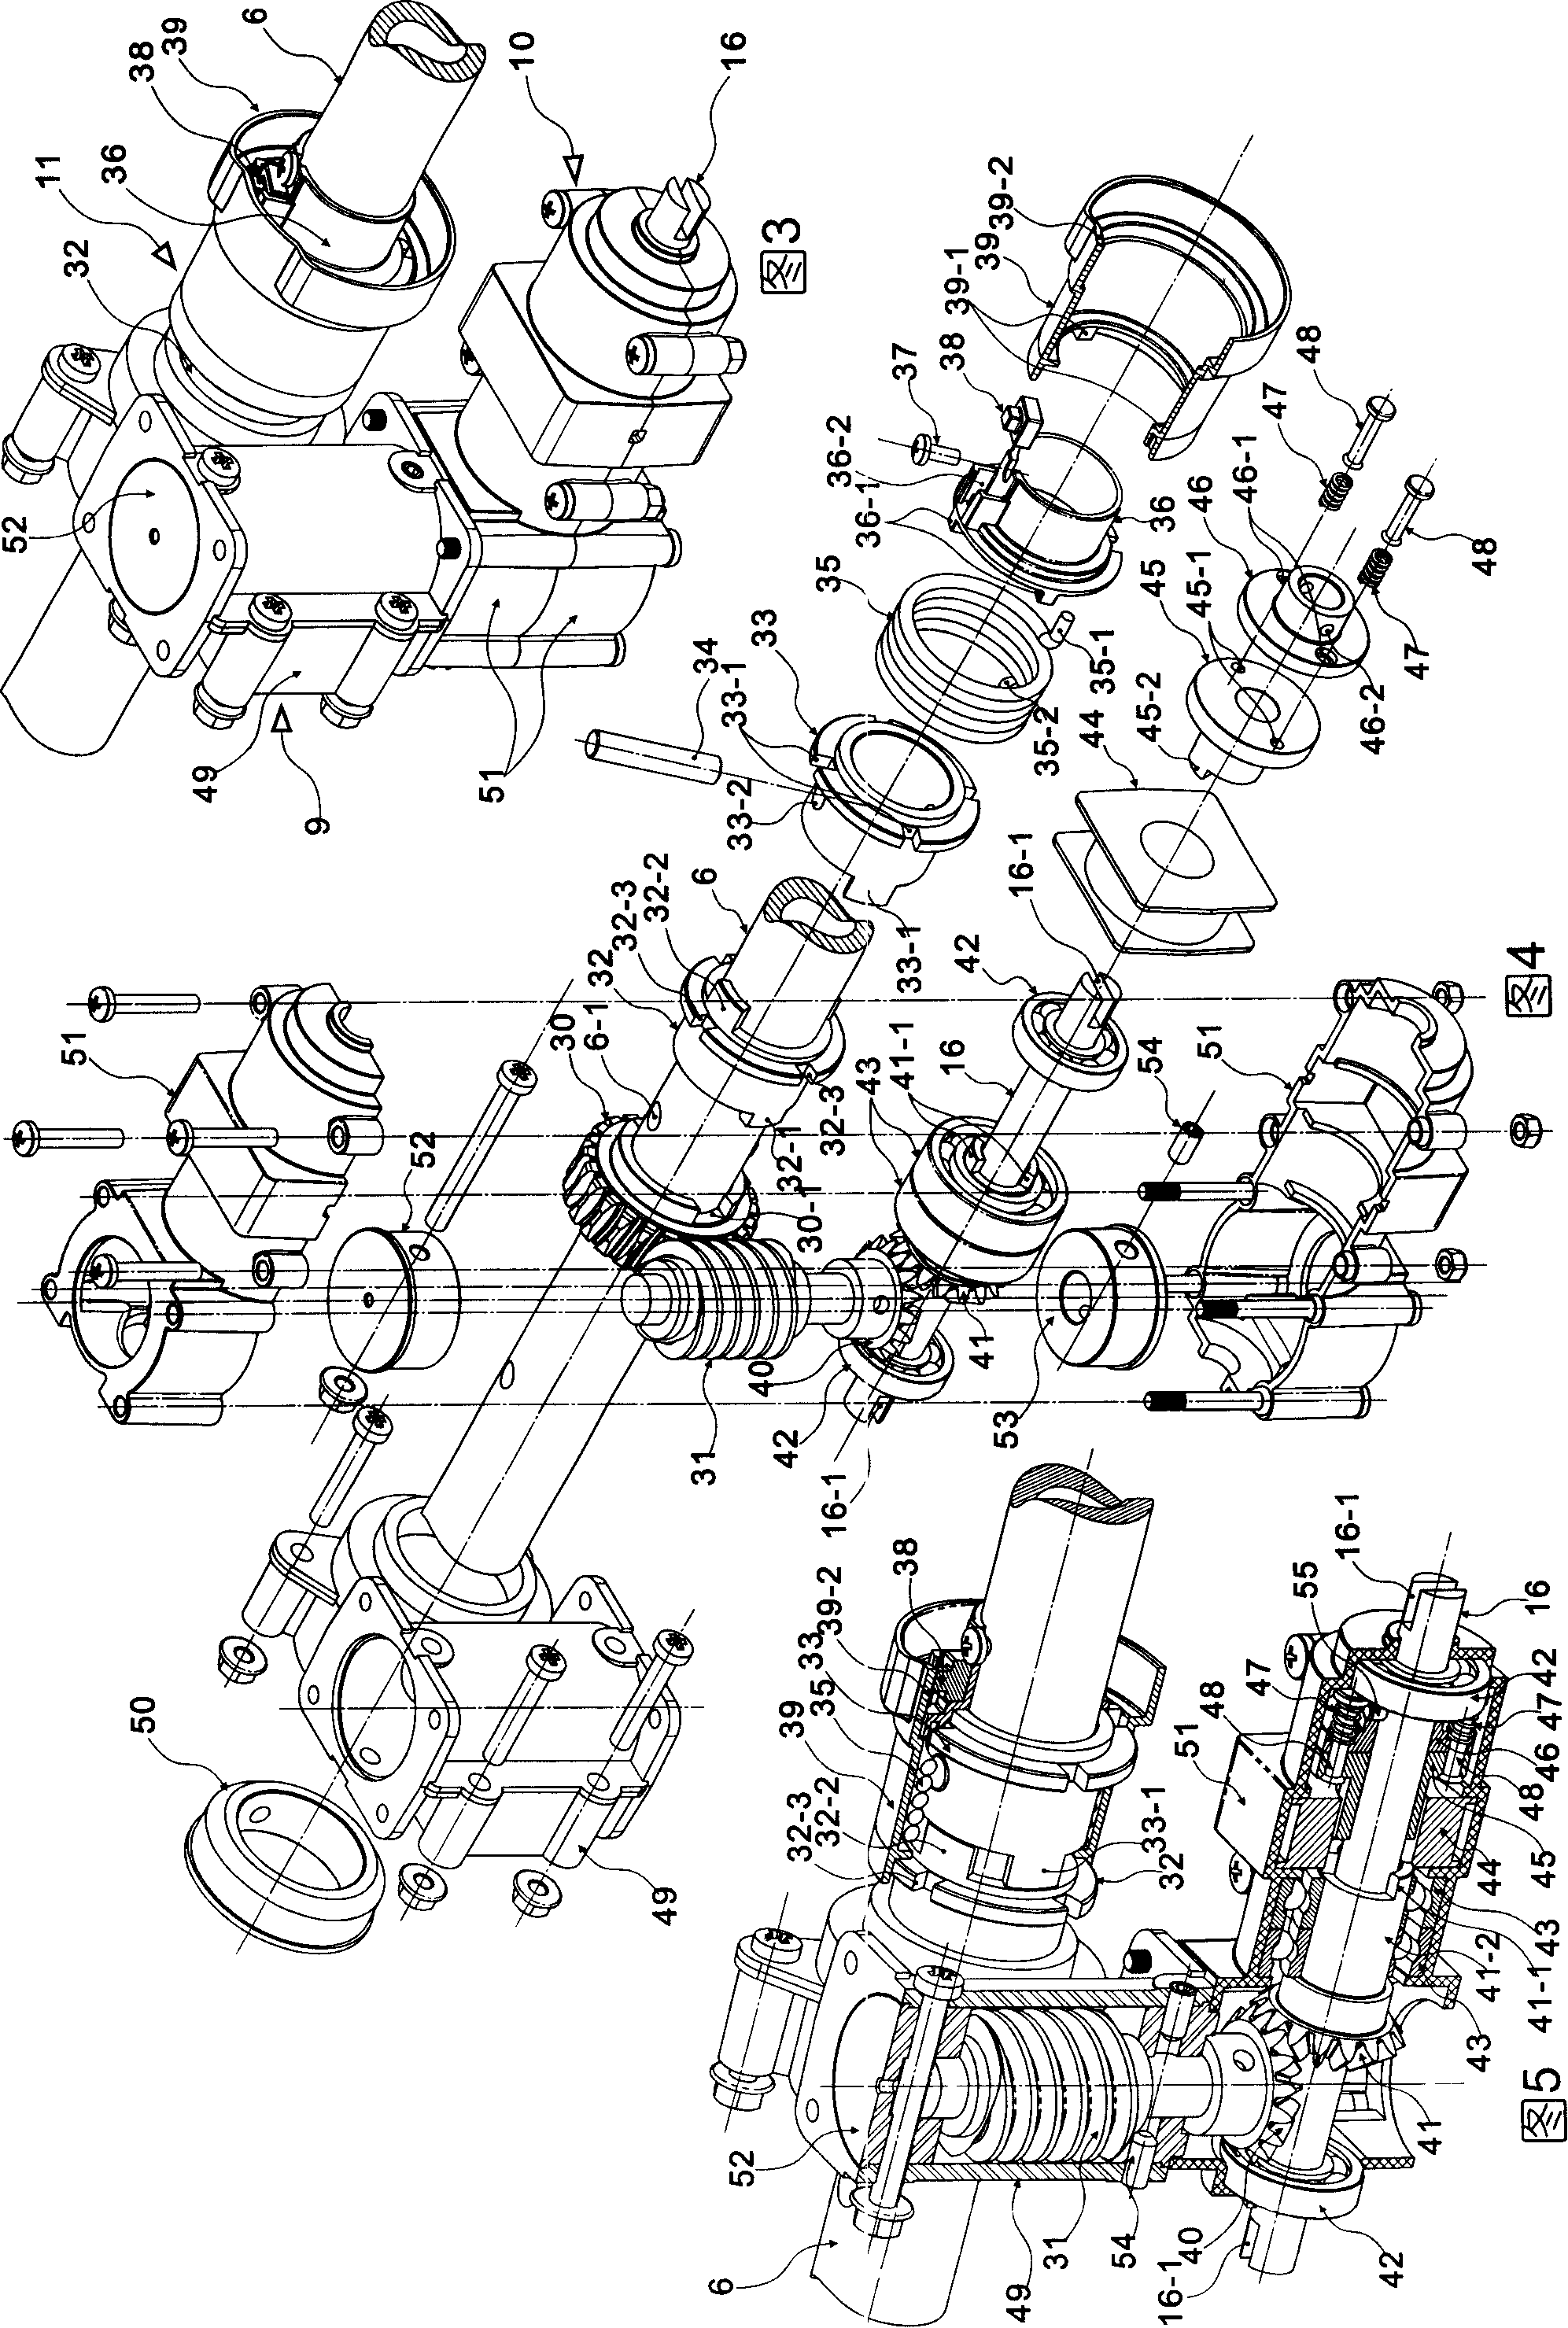 Electric lifting type storage device